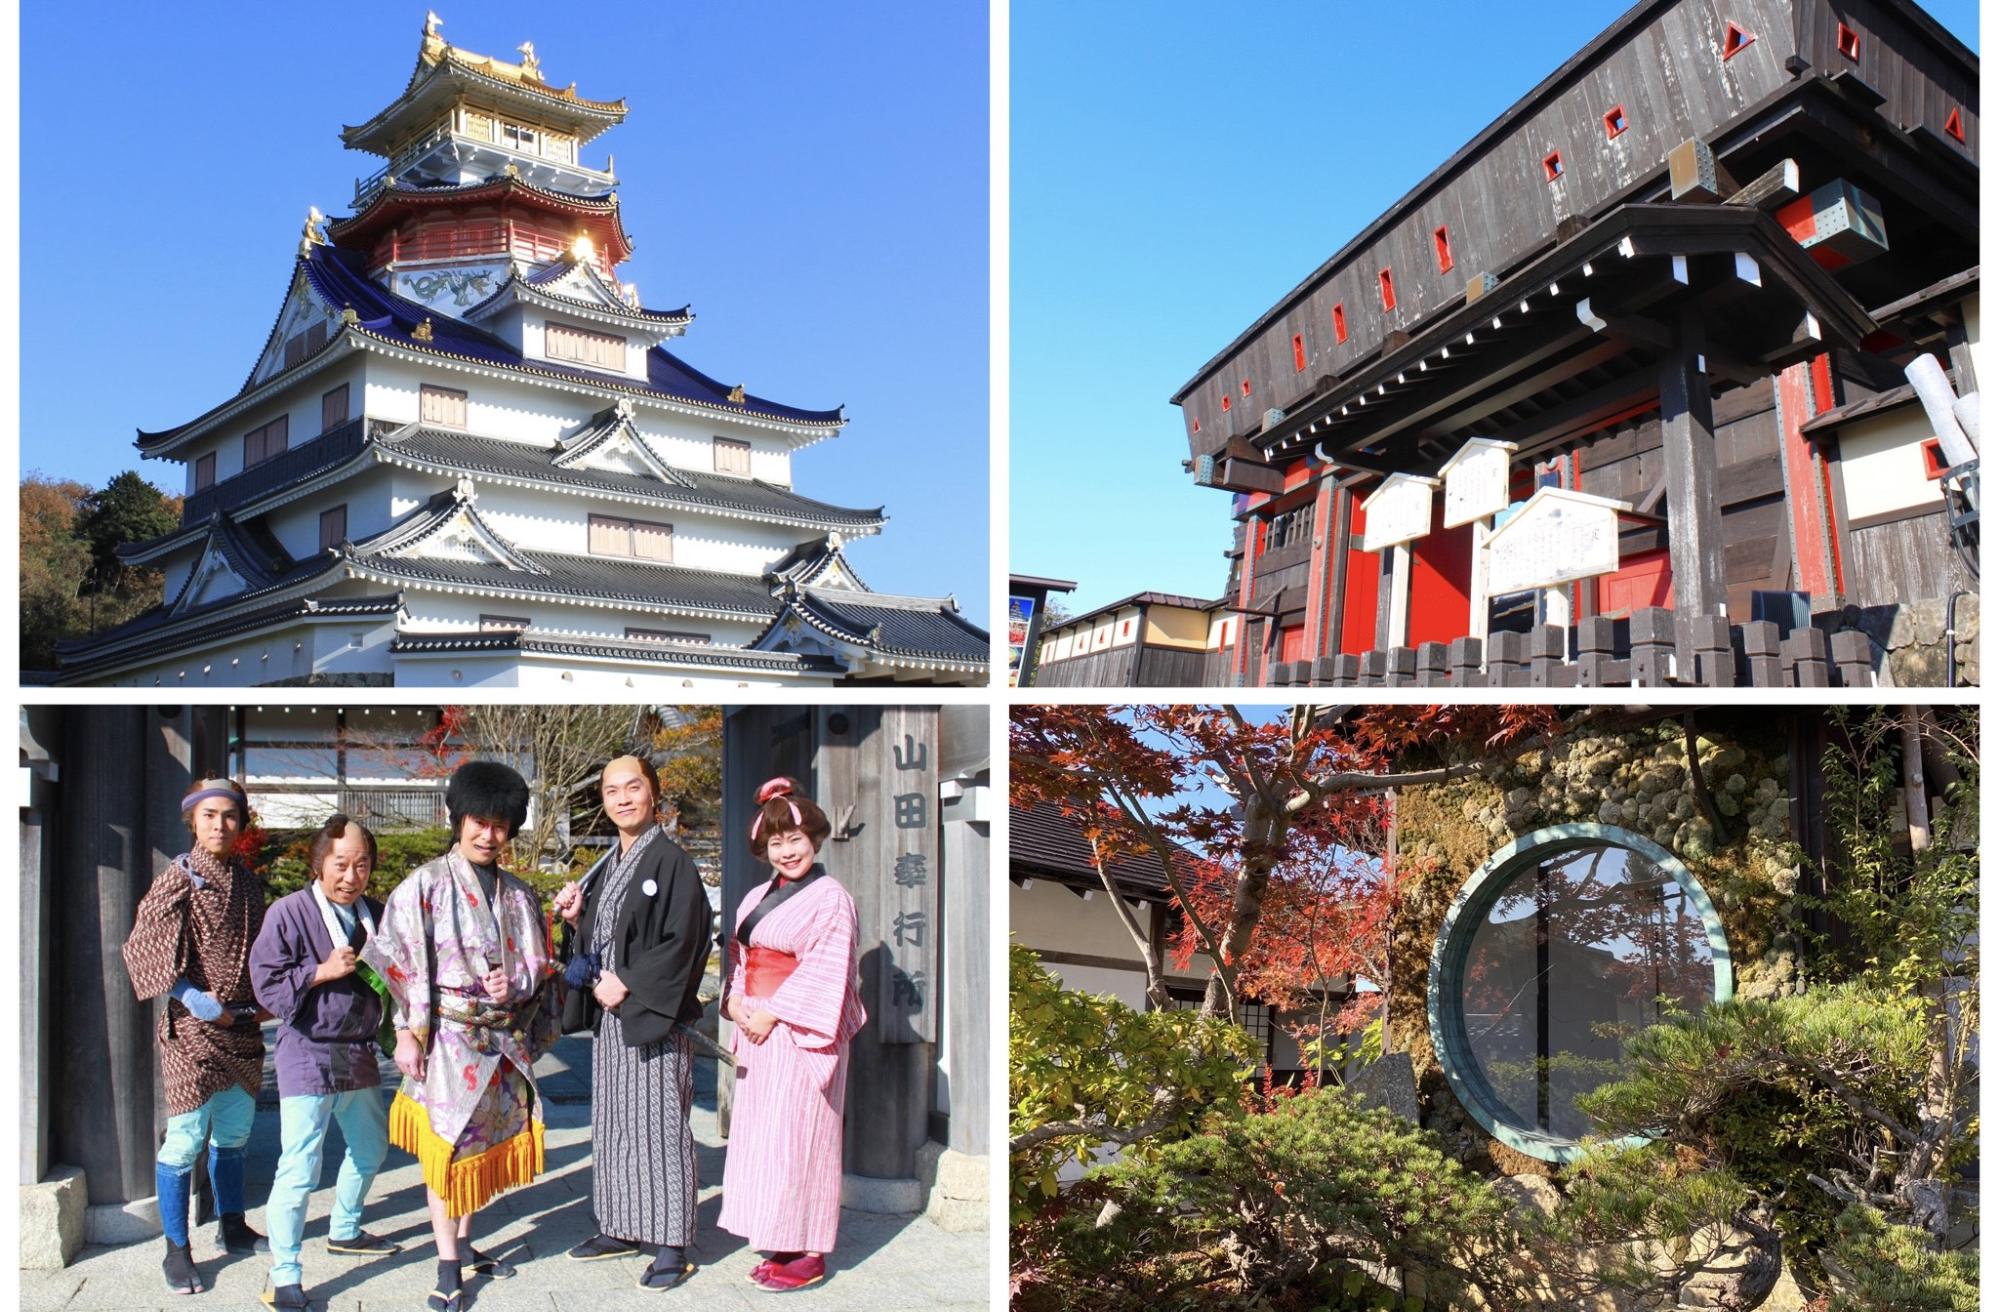 [Ise City] Perfect for Family Outings!
Guide to Ninja Kingdom Ise